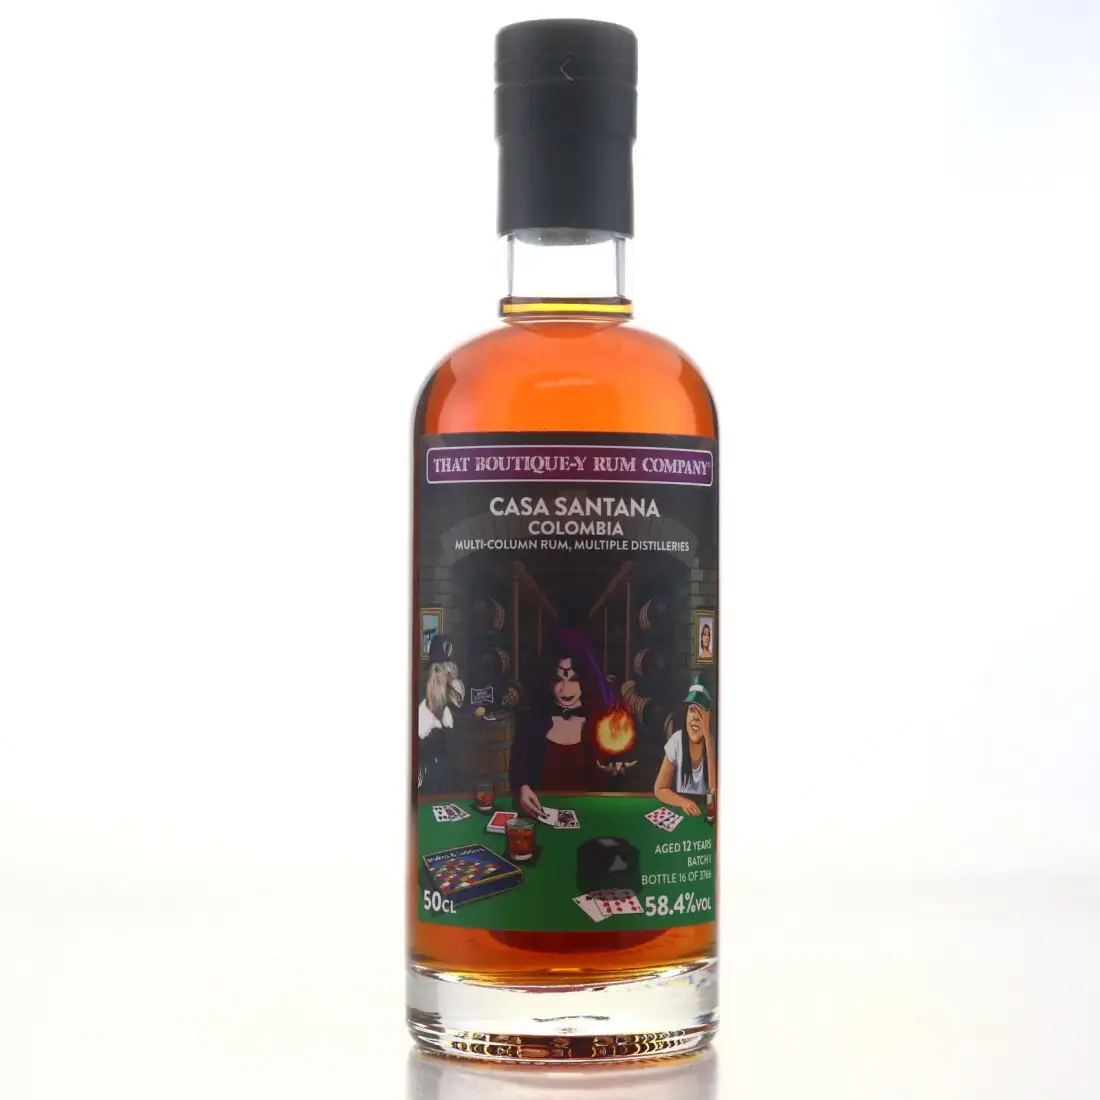 Image of the front of the bottle of the rum Casa Santana